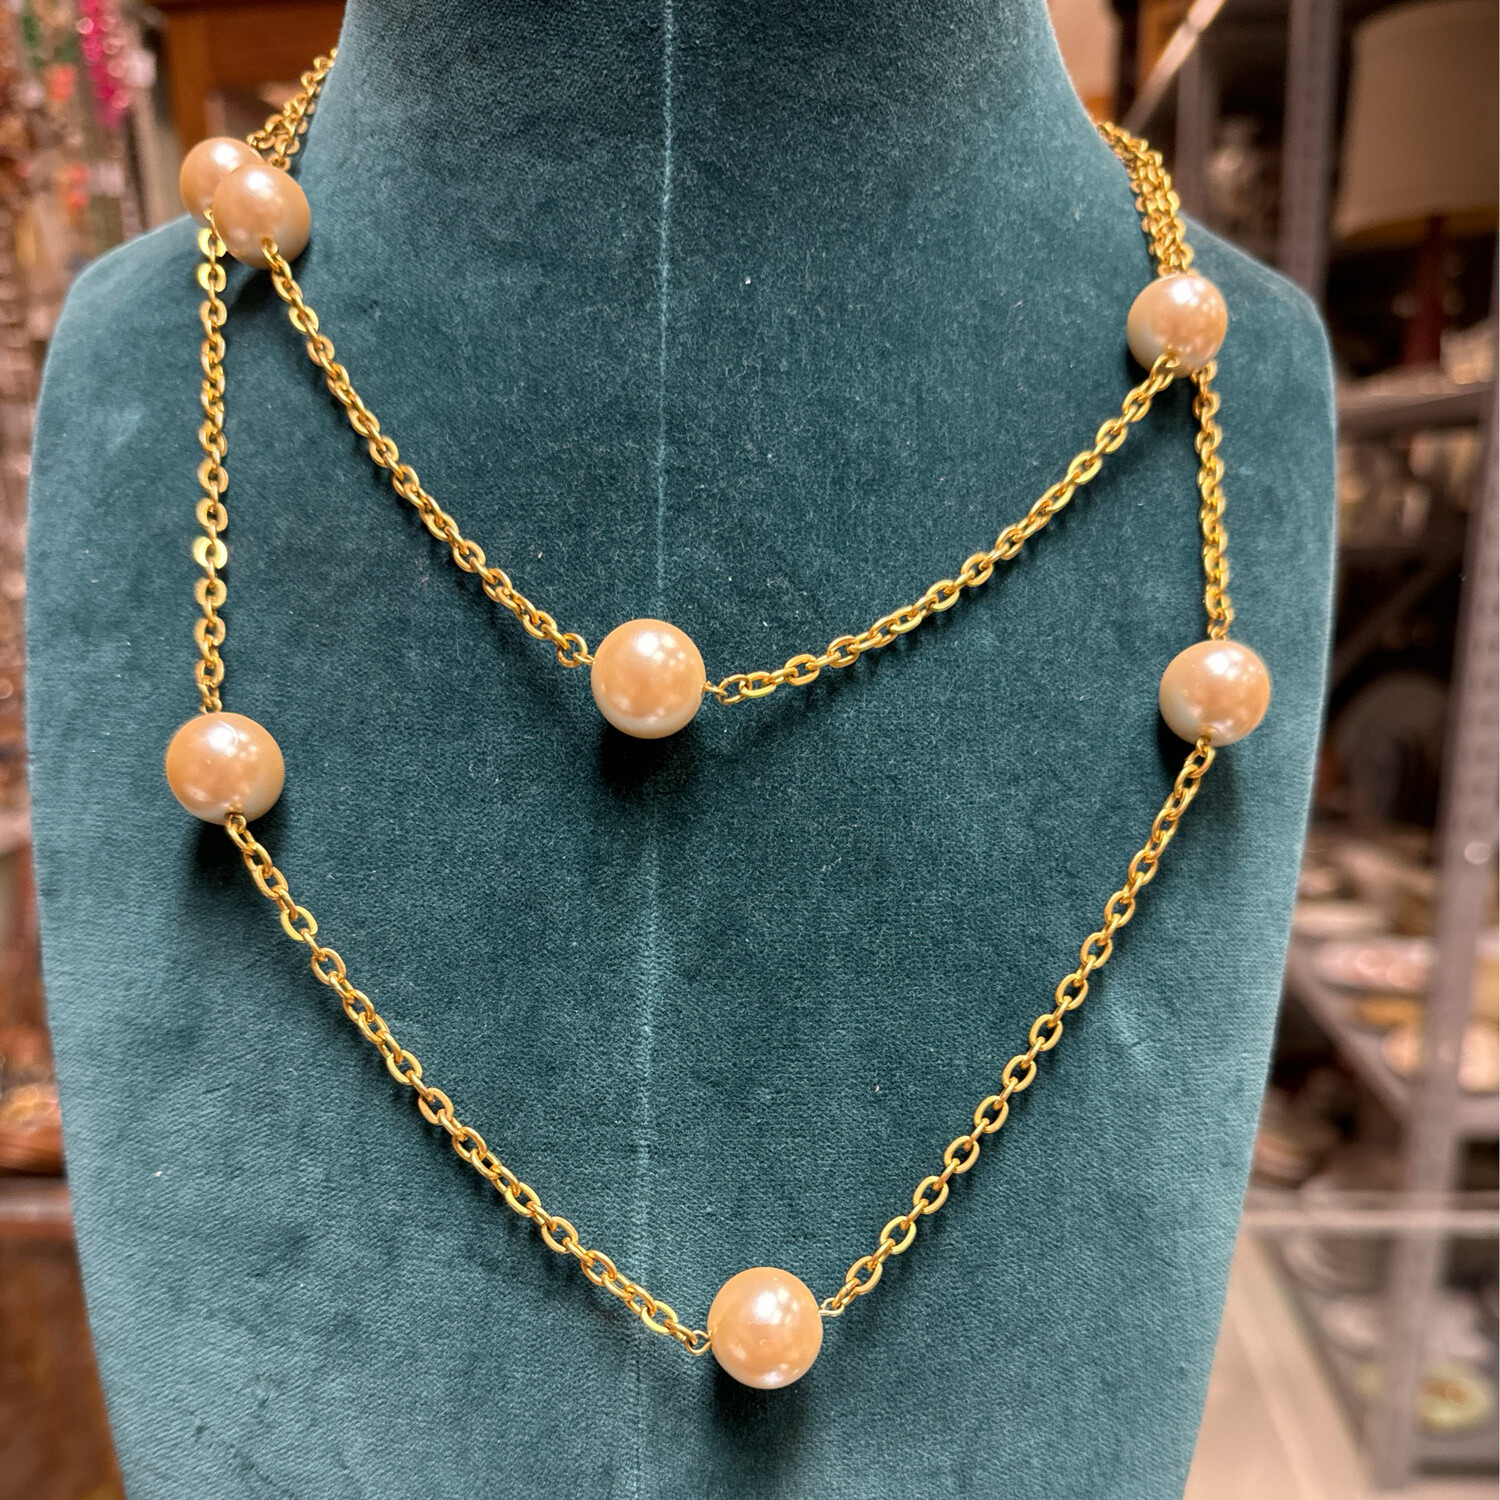 Gold with Large Round Pearls - MH